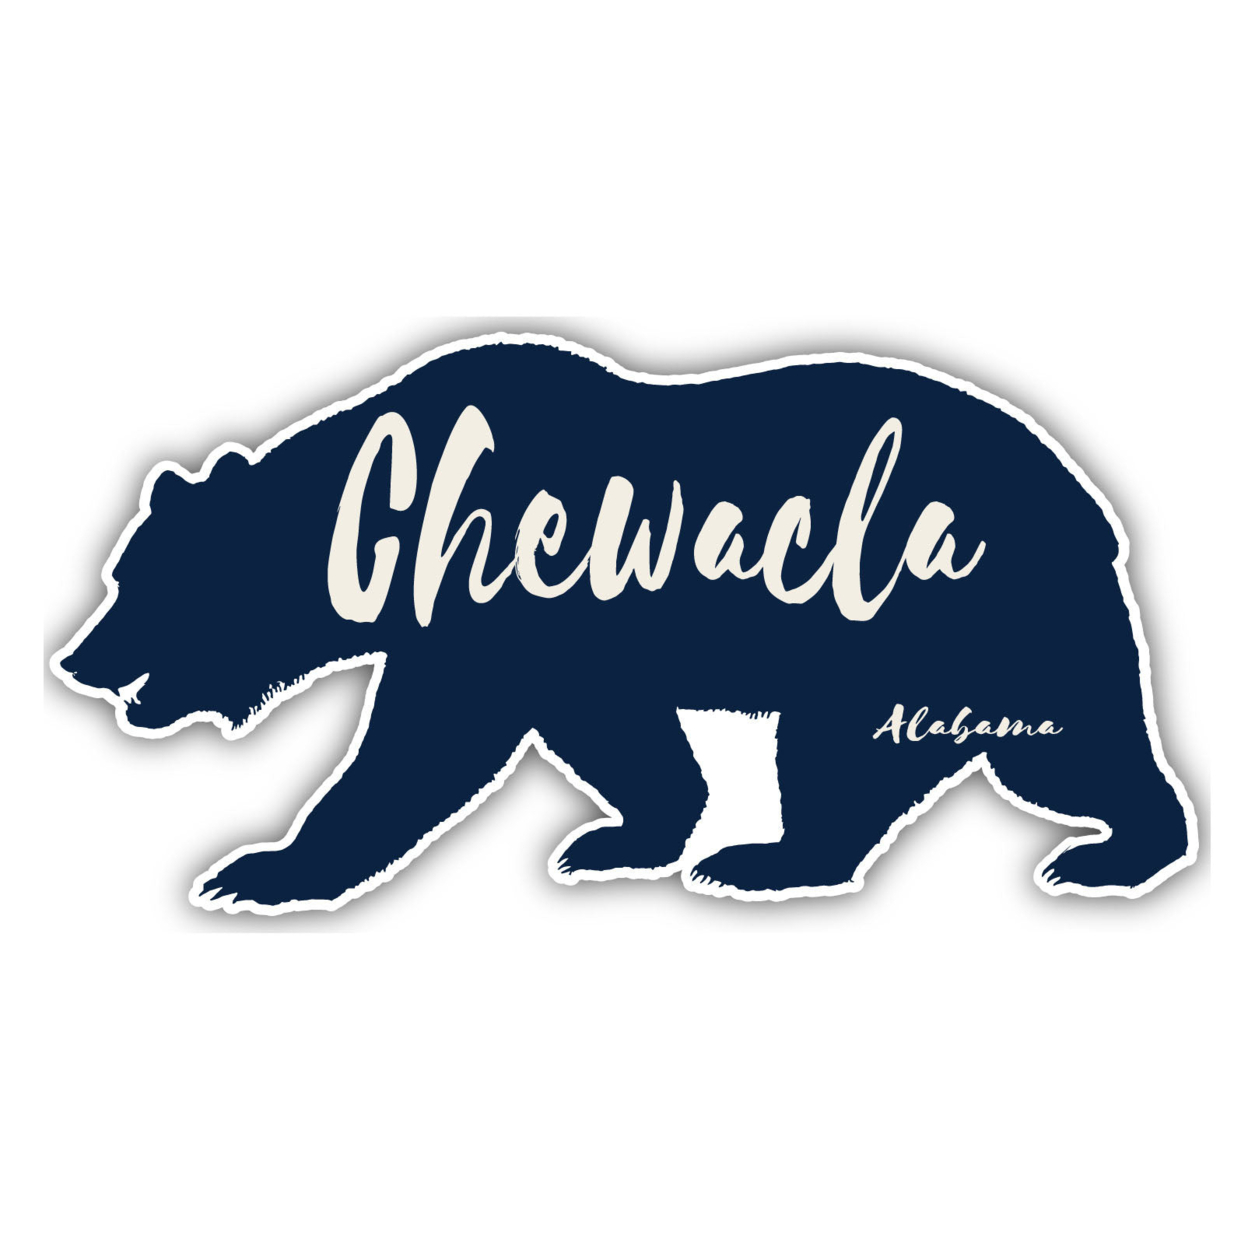 Chewacla Alabama Souvenir Decorative Stickers (Choose Theme And Size) - 4-Pack, 12-Inch, Bear